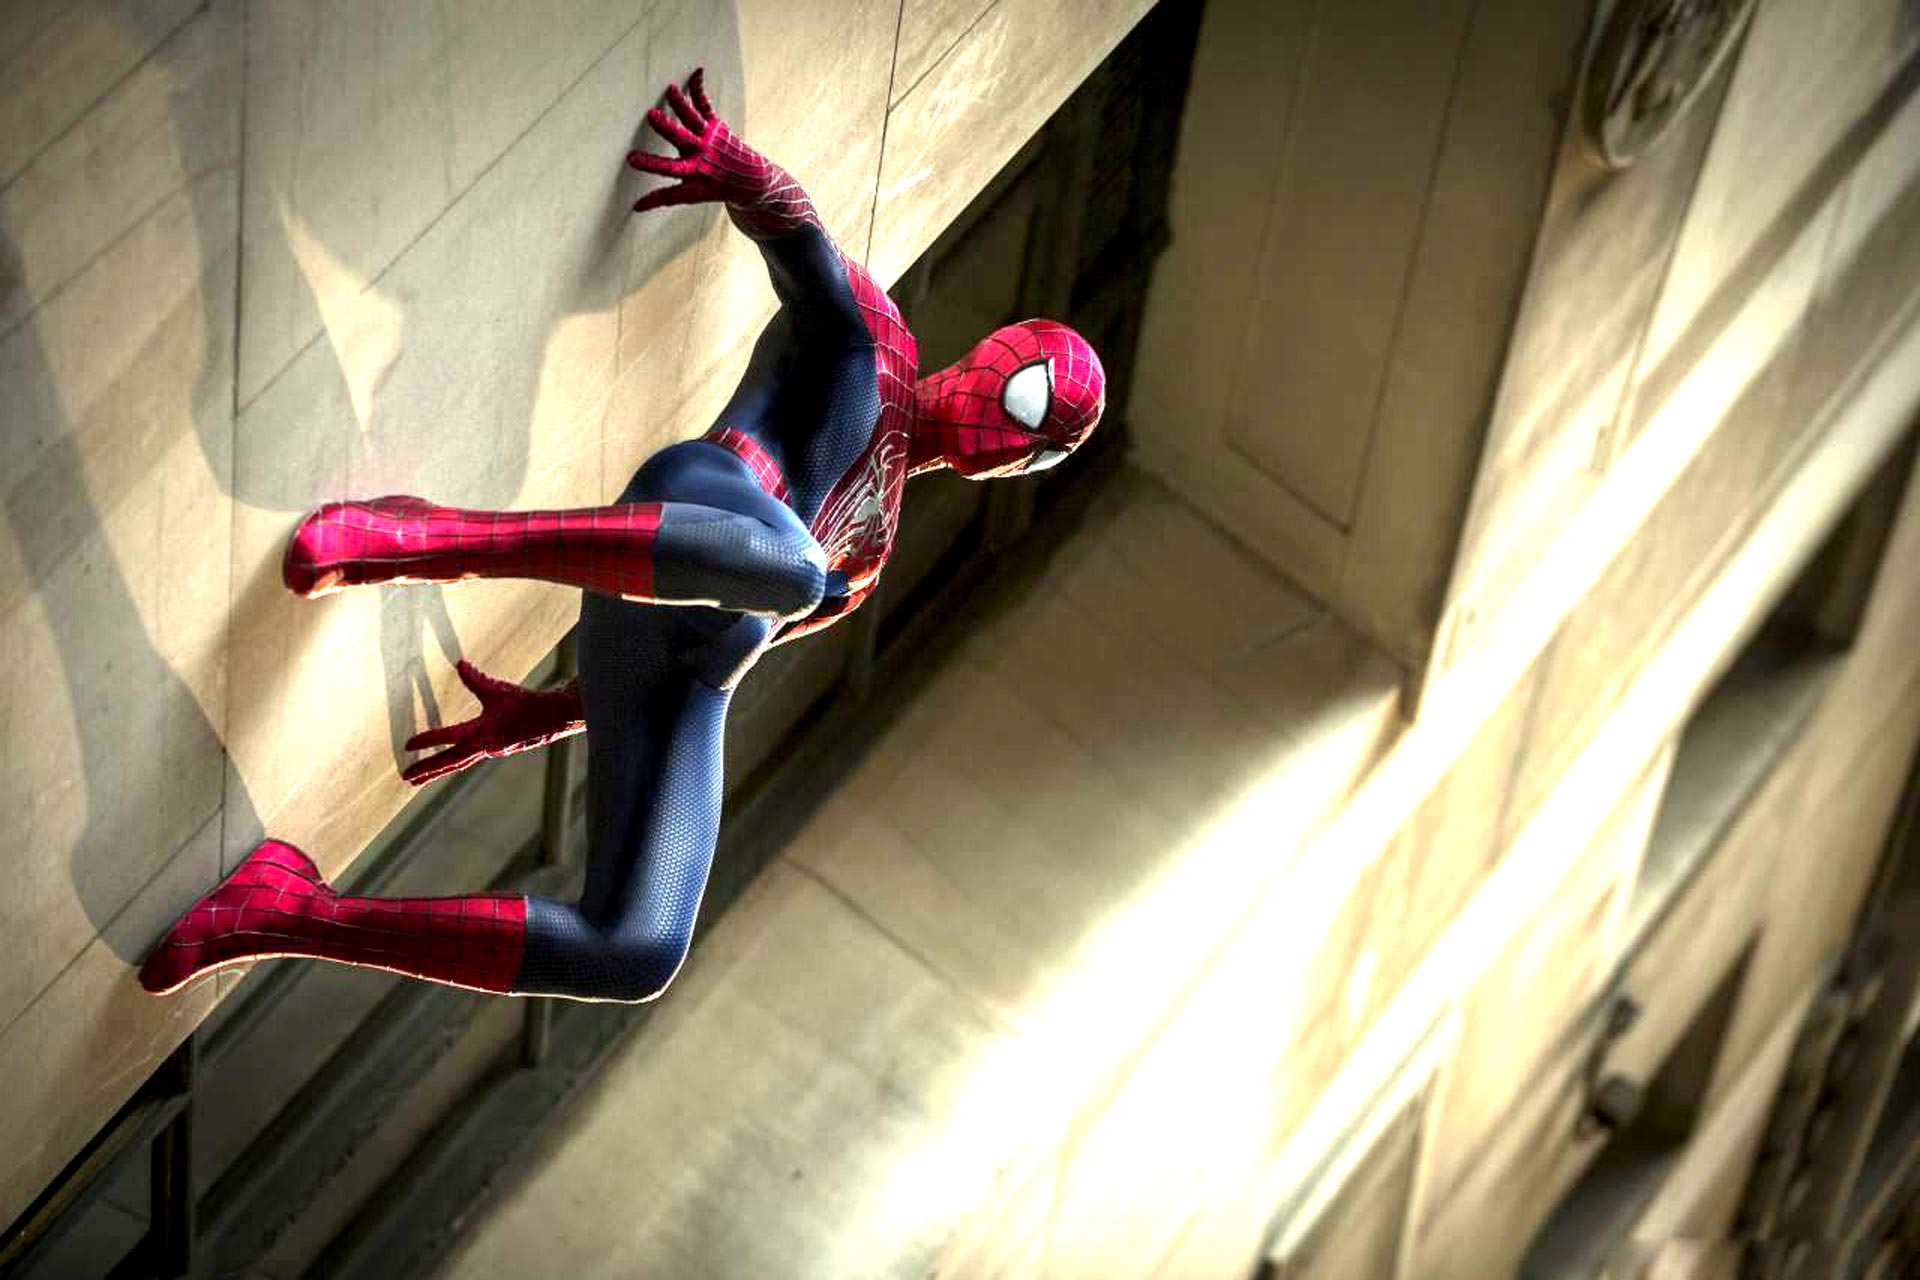 The Amazing Spider Man 2 HD Wallpapers & Desktop Backgrounds | The ...